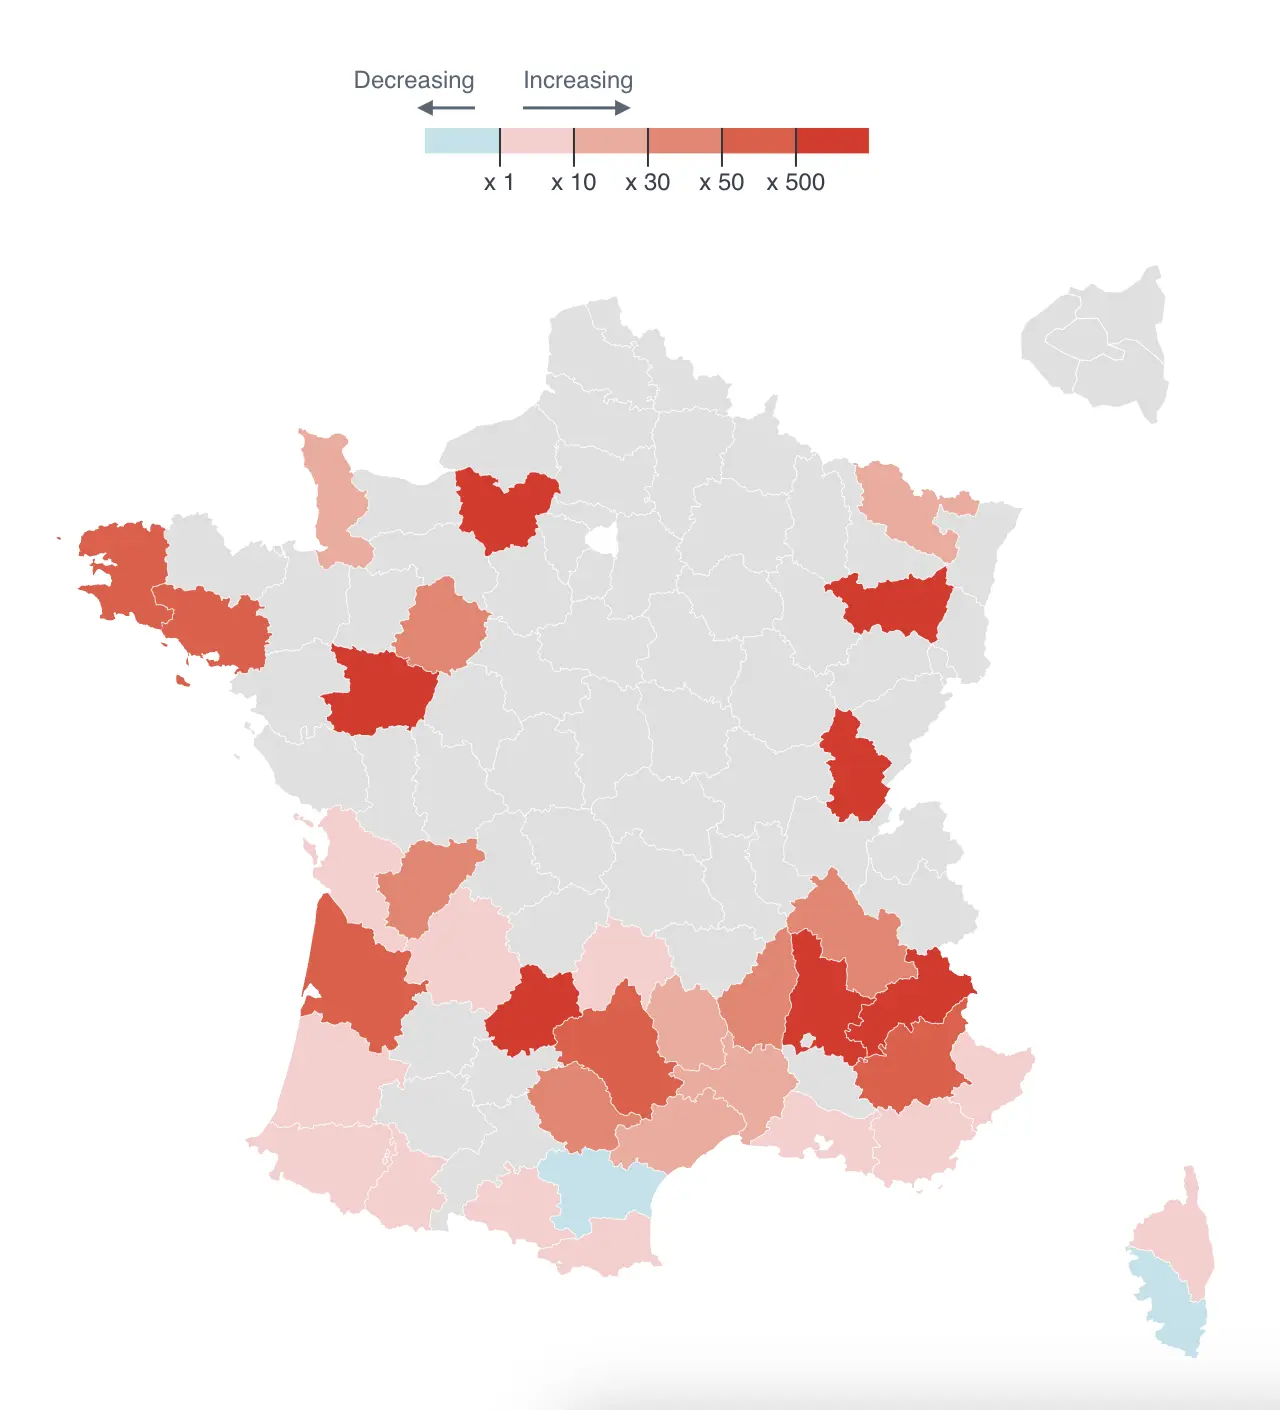 Wildfires across France in 2020